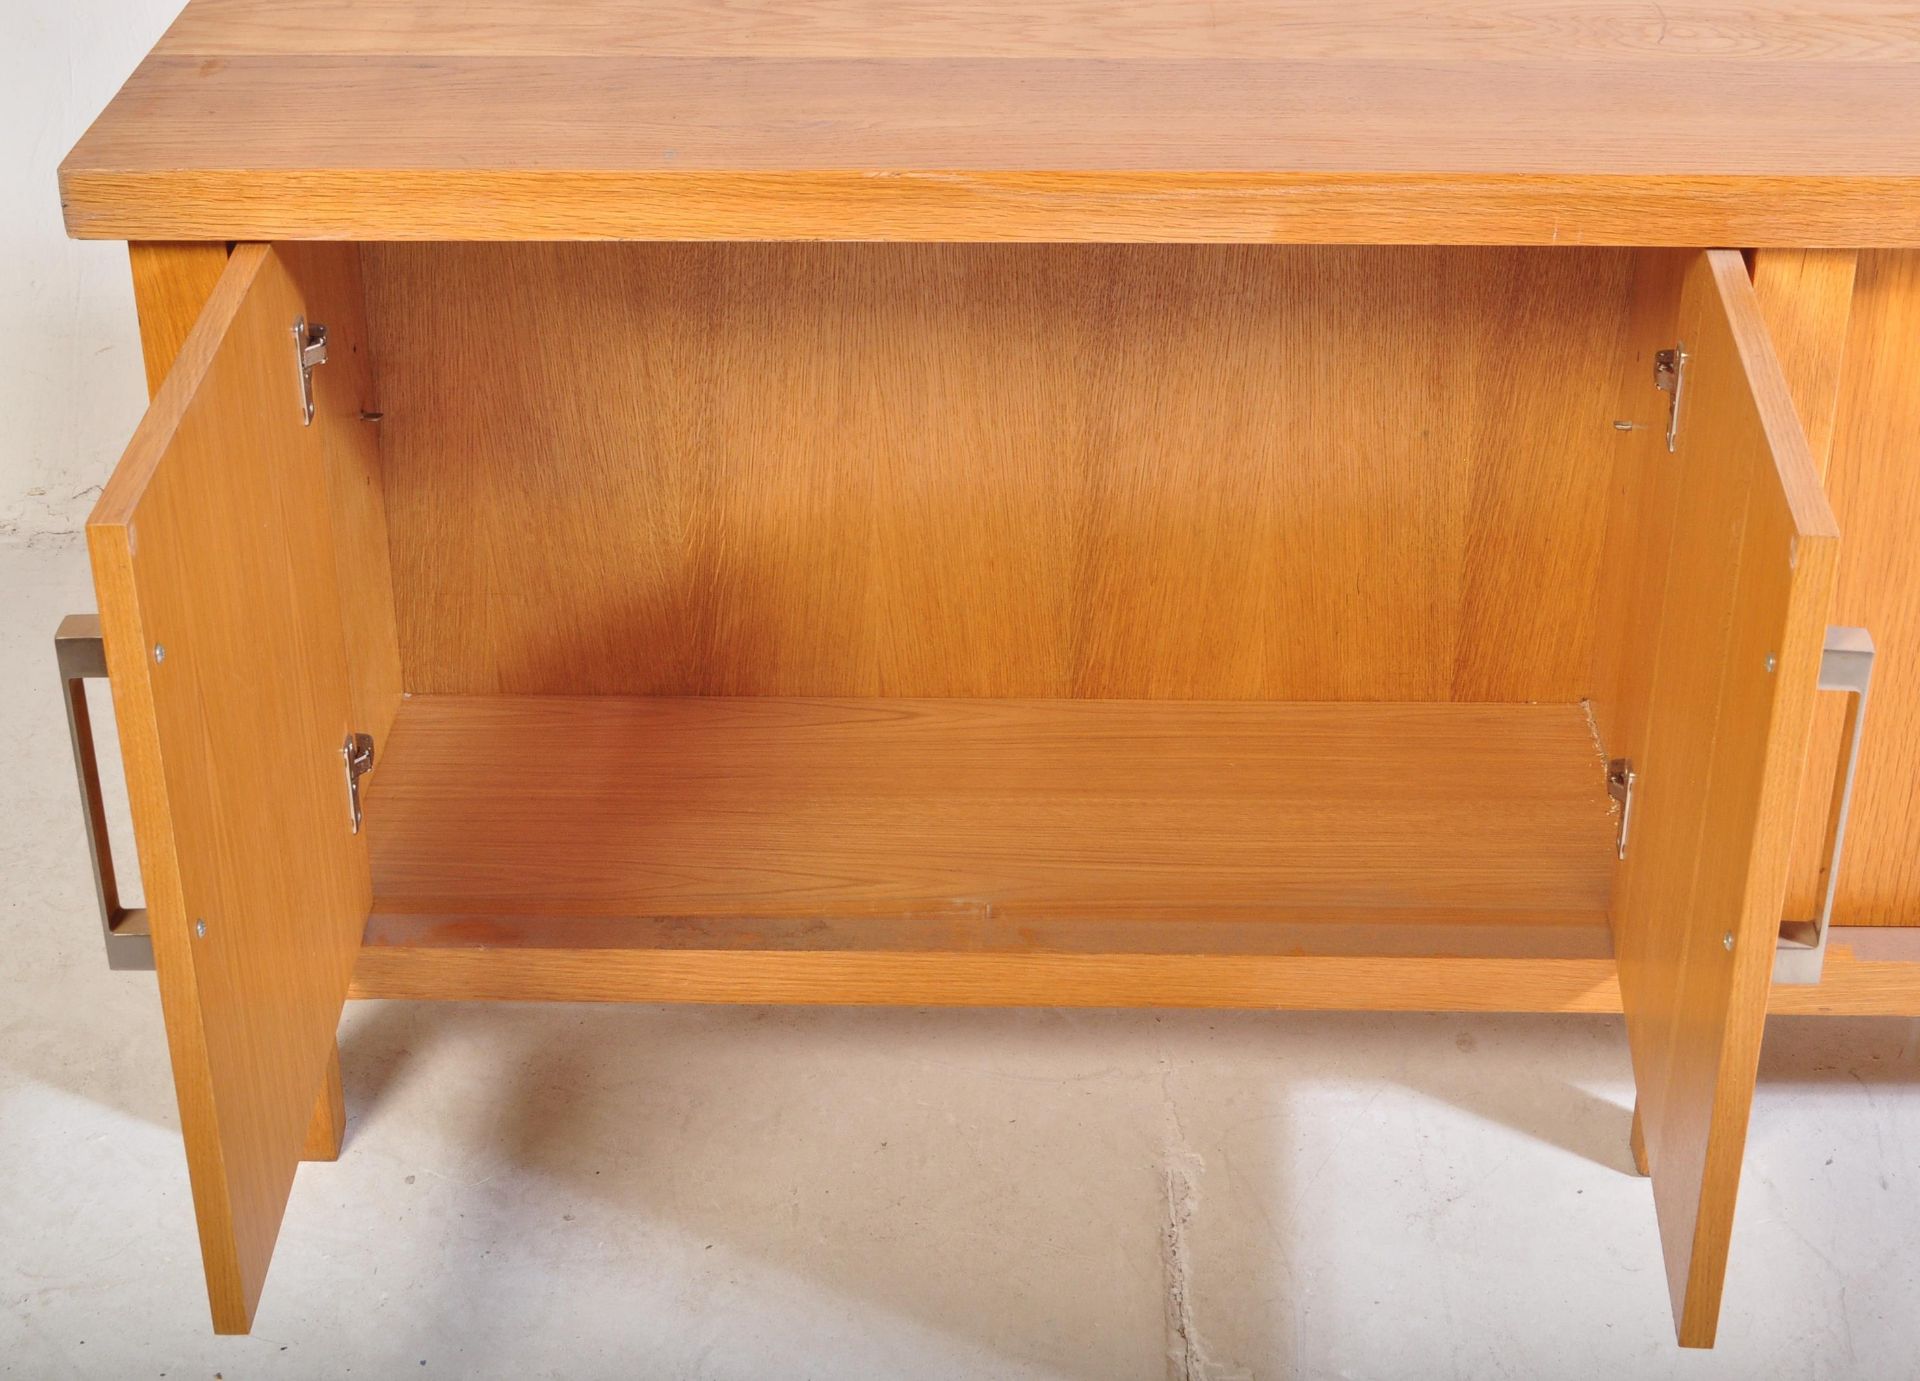 CONTEMPORARY OAK FURNITURE LAND STYLE SIDEBOARD - Image 3 of 5